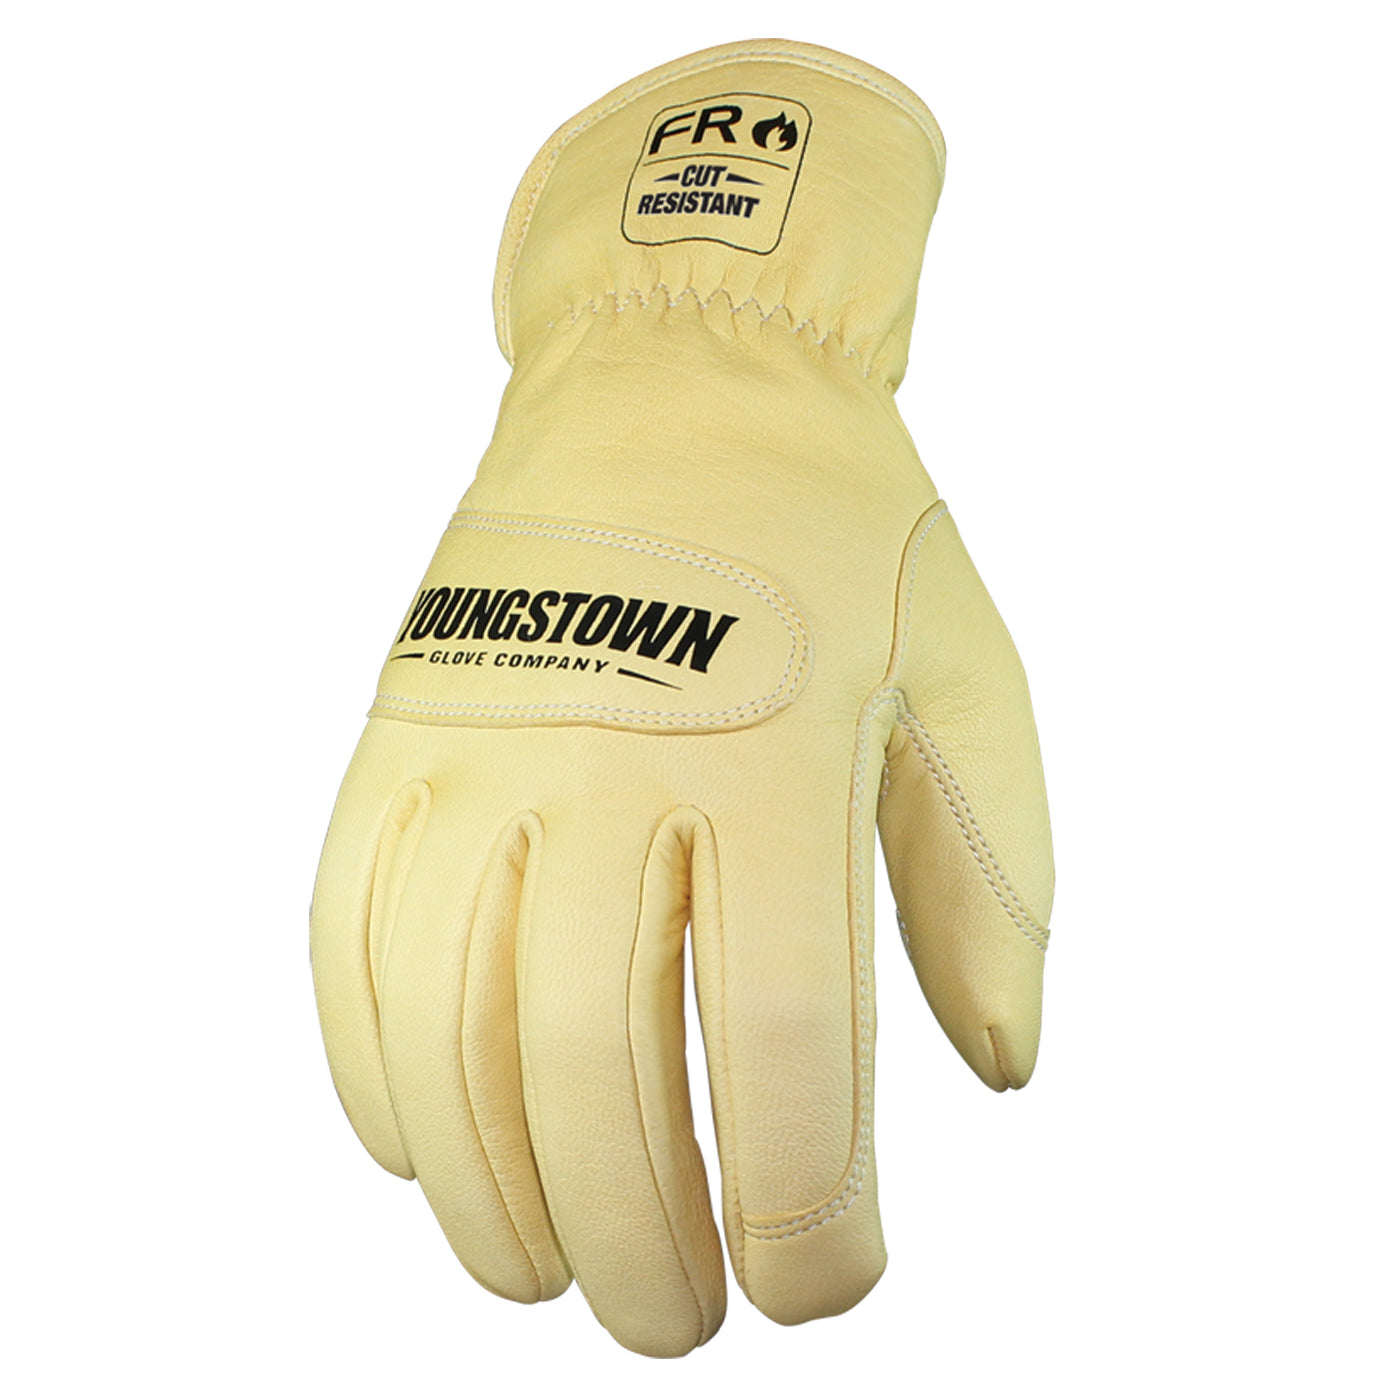 12-3365-60 Youngstown FR Ground Glove - Main image